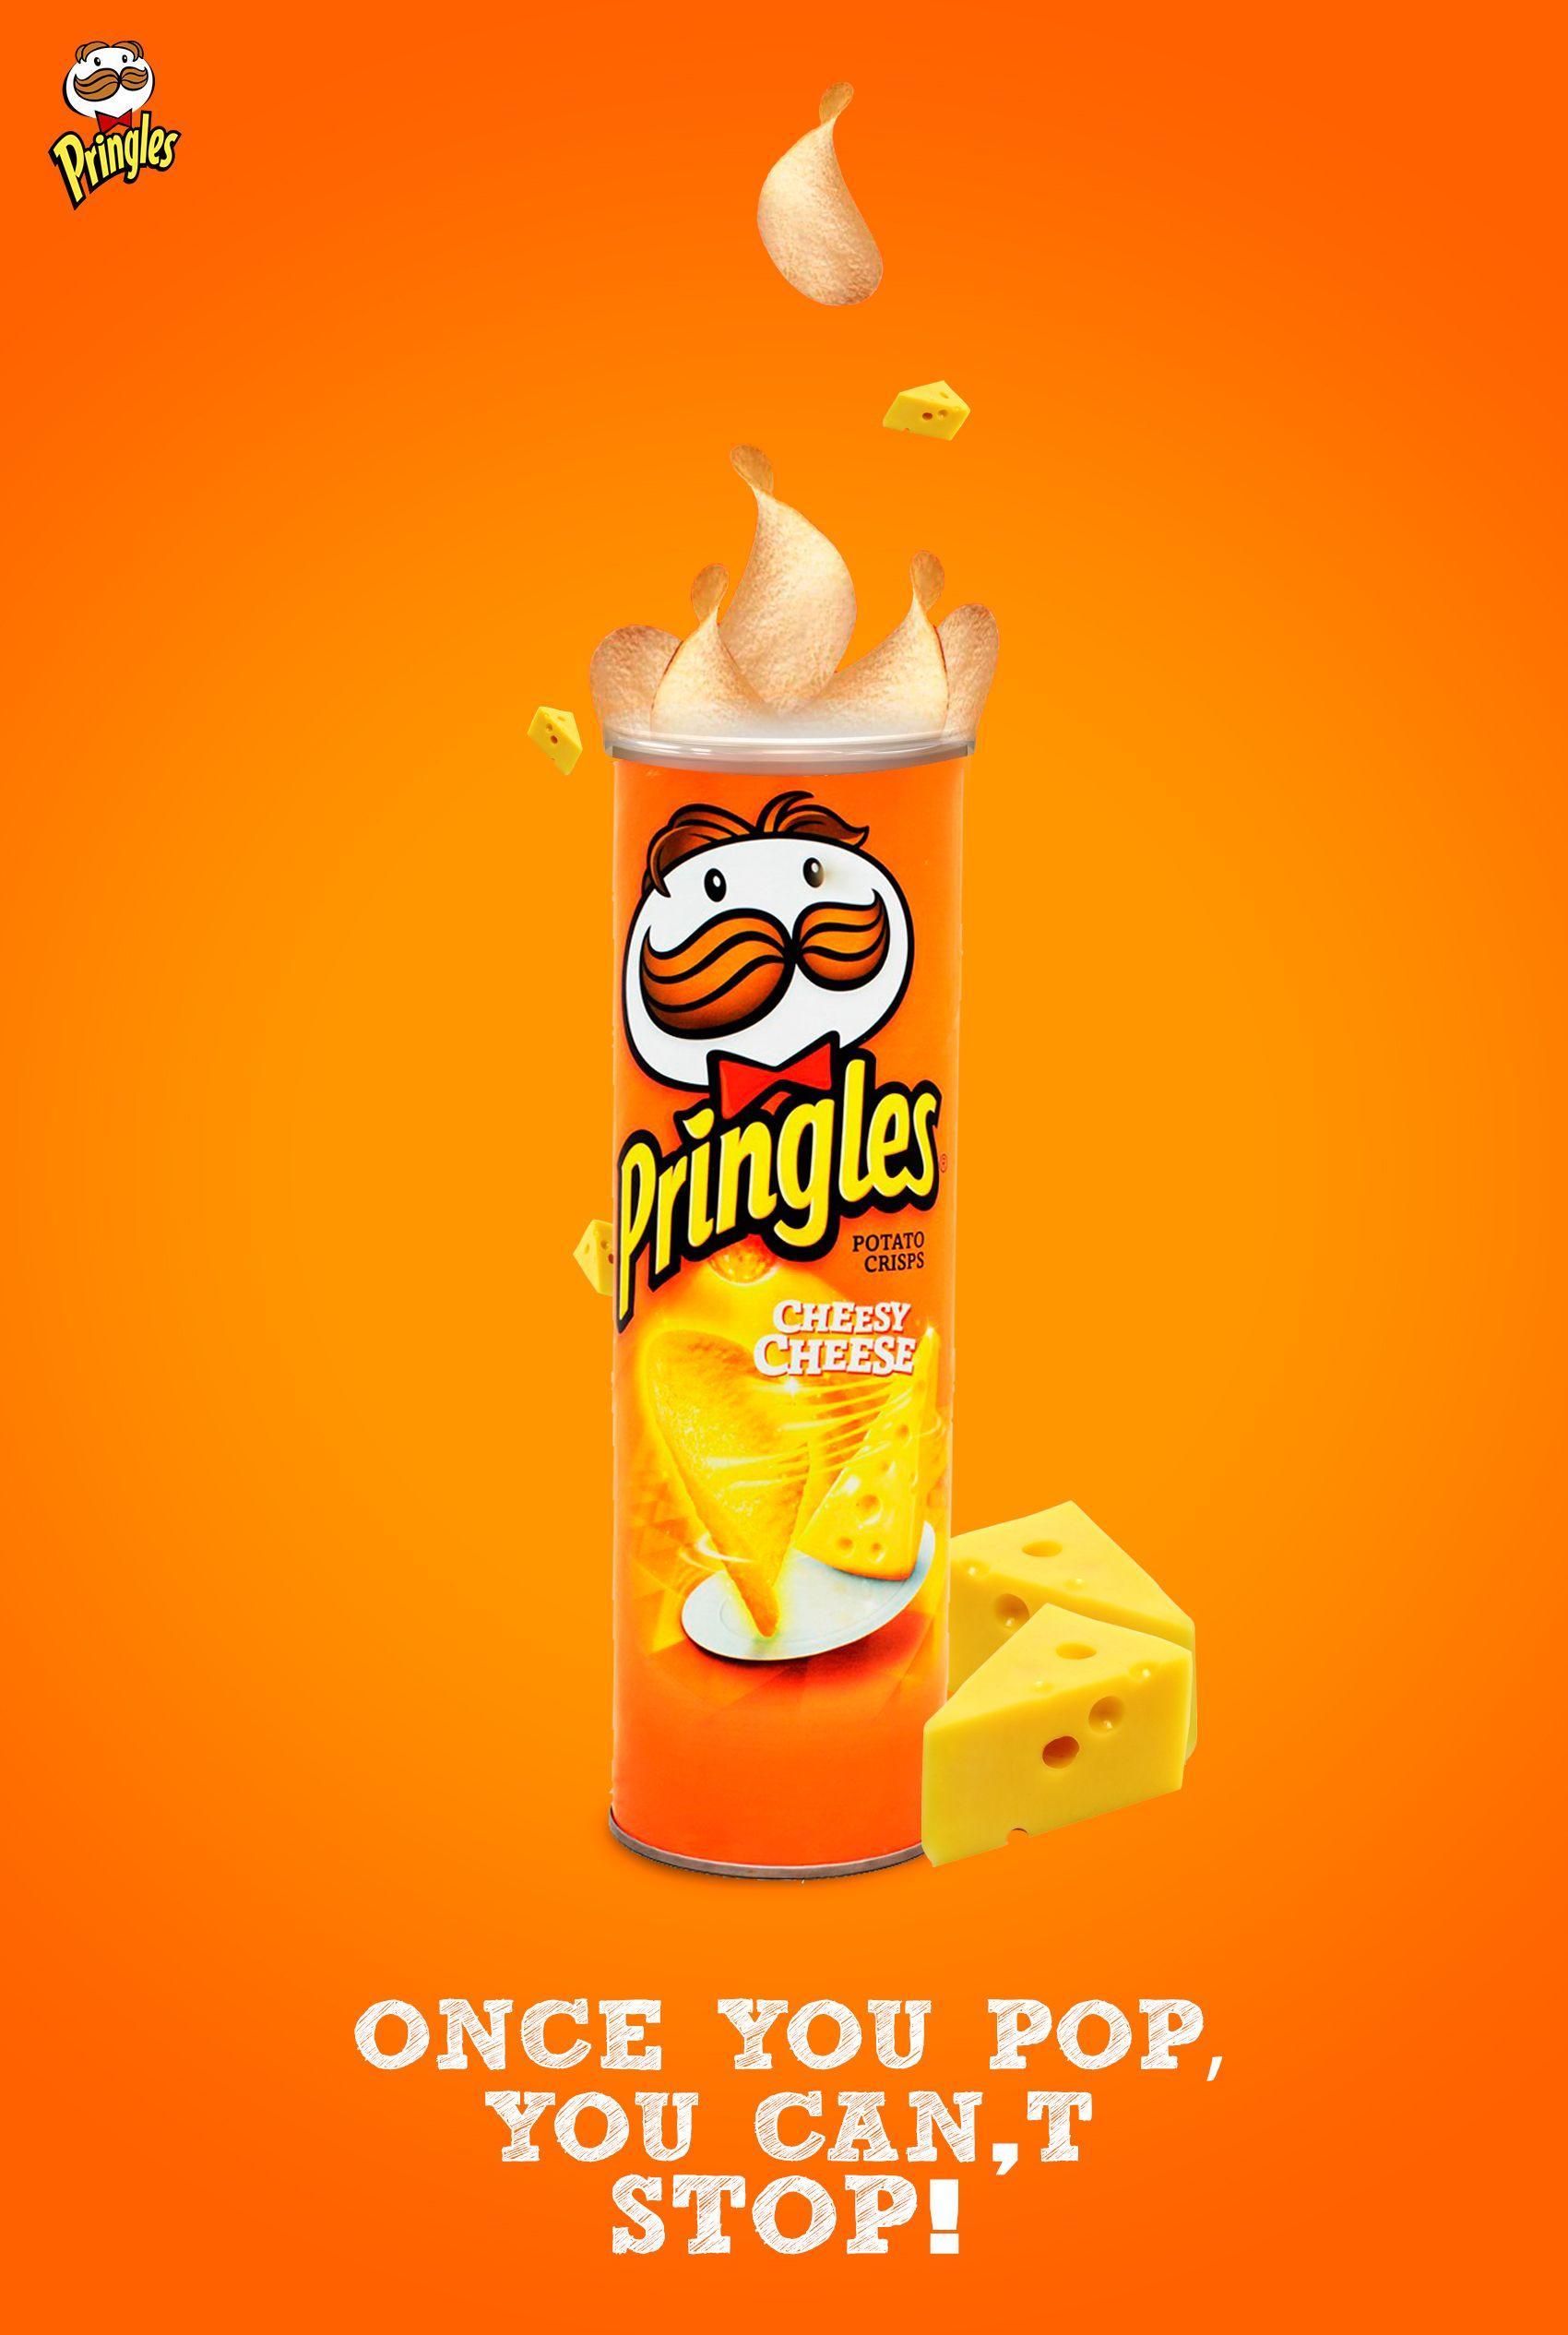 Pringles Wallpapers - Top Free Pringles Backgrounds - WallpaperAccess